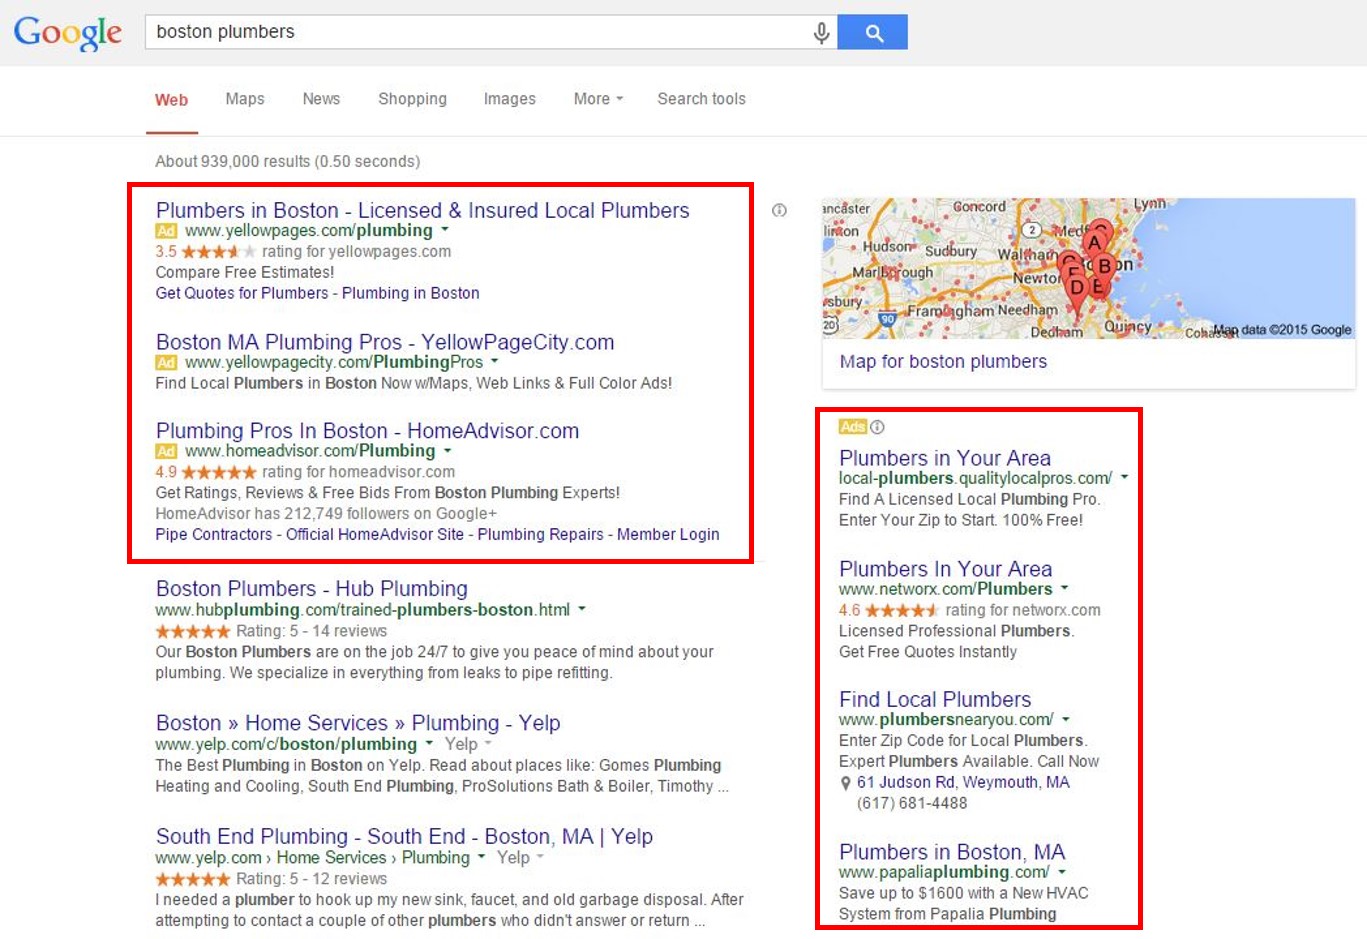 Google AdWords search engine results by Boston Plumbers